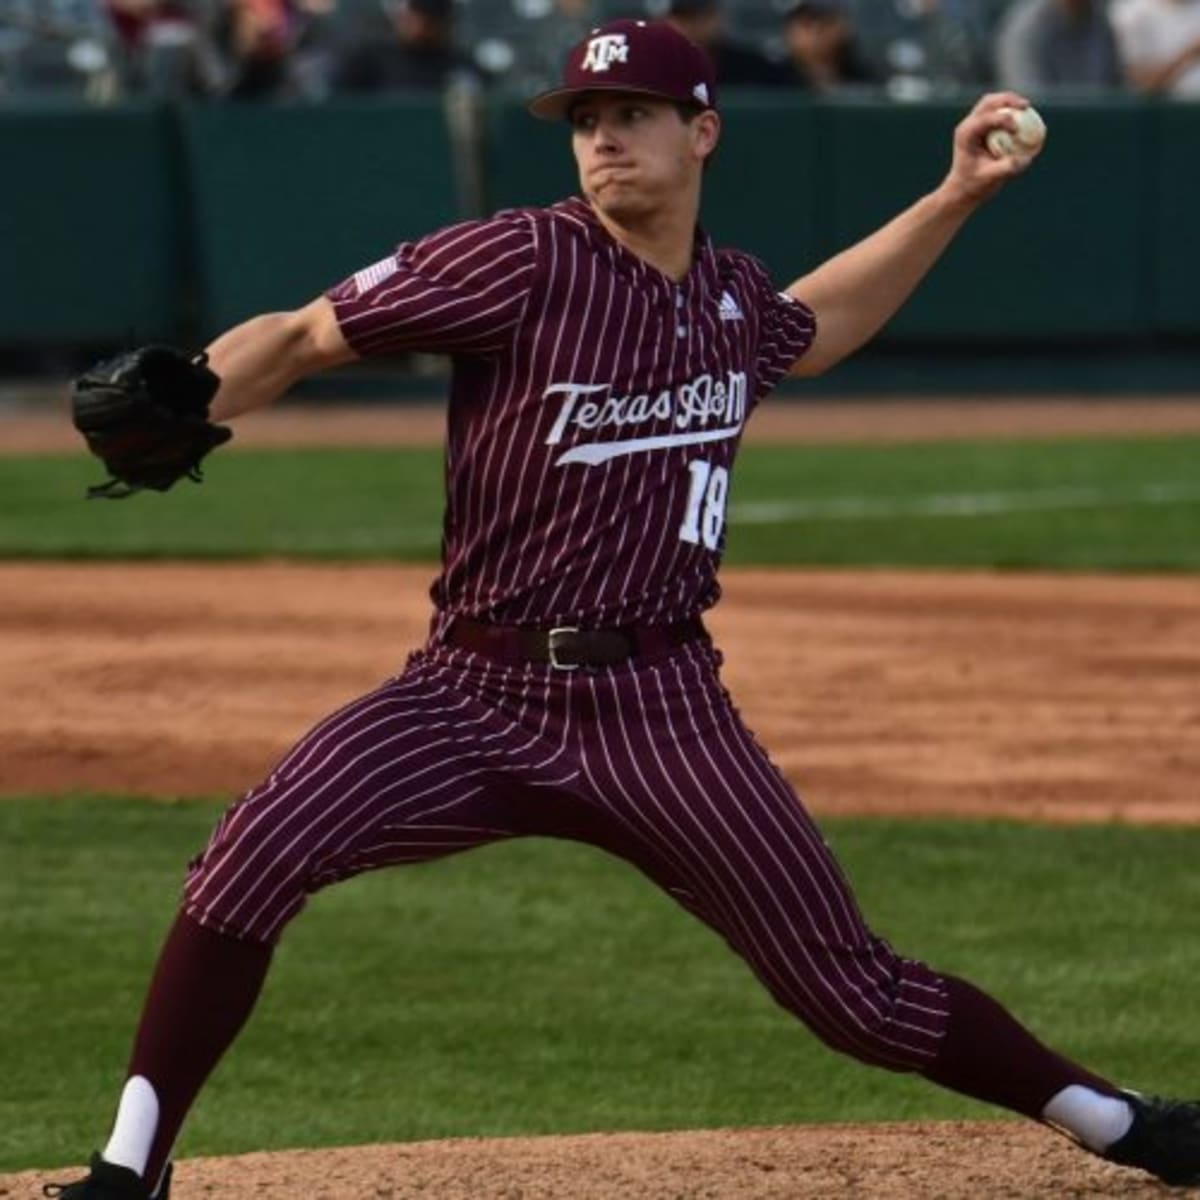 Texas A&M pitcher, Brenham product Chandler Jozwiak drafted by